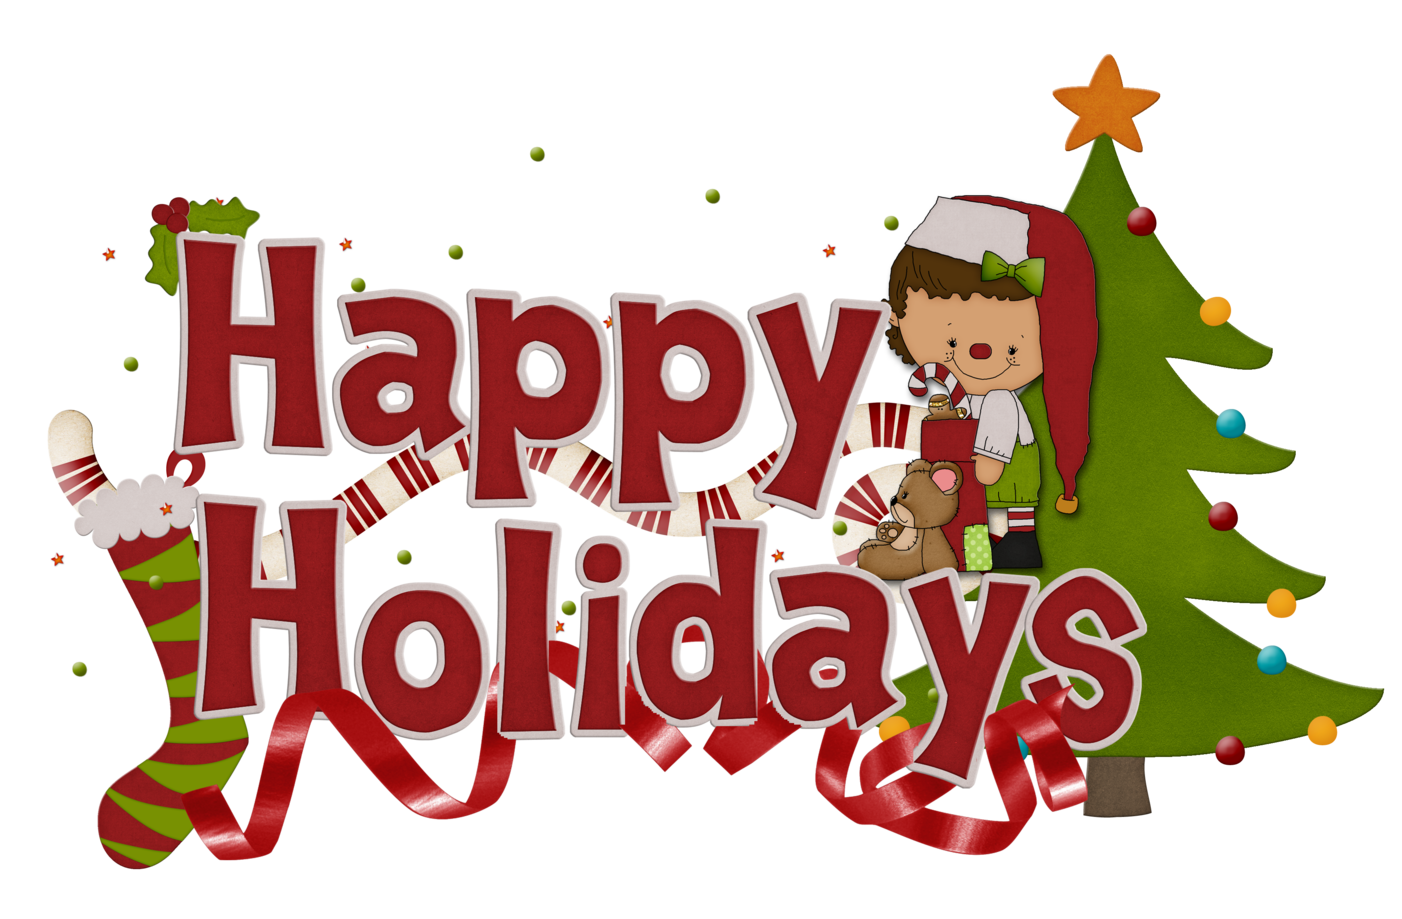 Holiday clipart happy hour